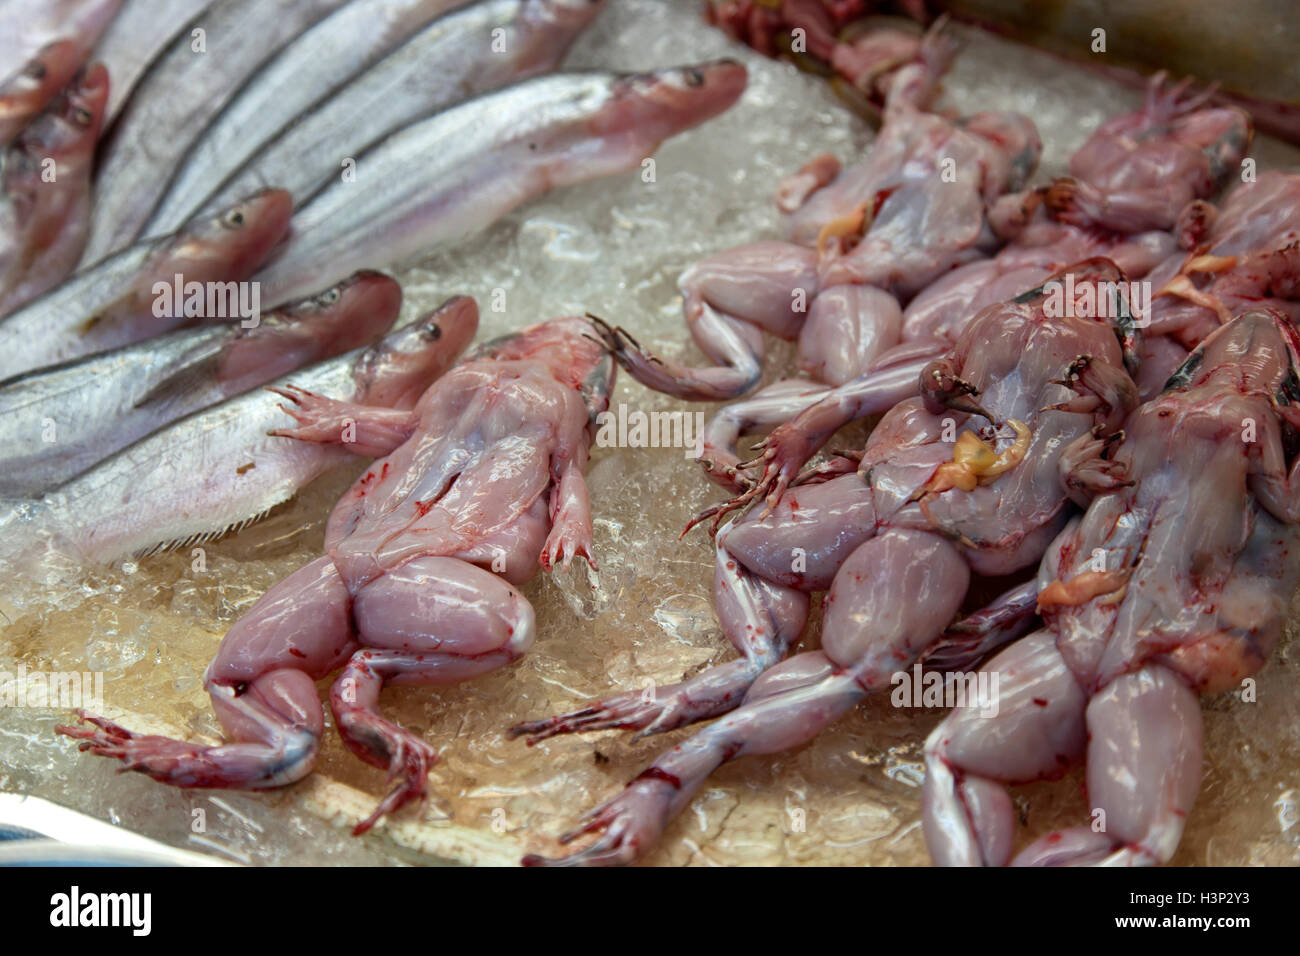 Skinned and gutted toads for sale alongside fish at a stall at Or Tor Gor market in Bangkok in Thailand. Stock Photo